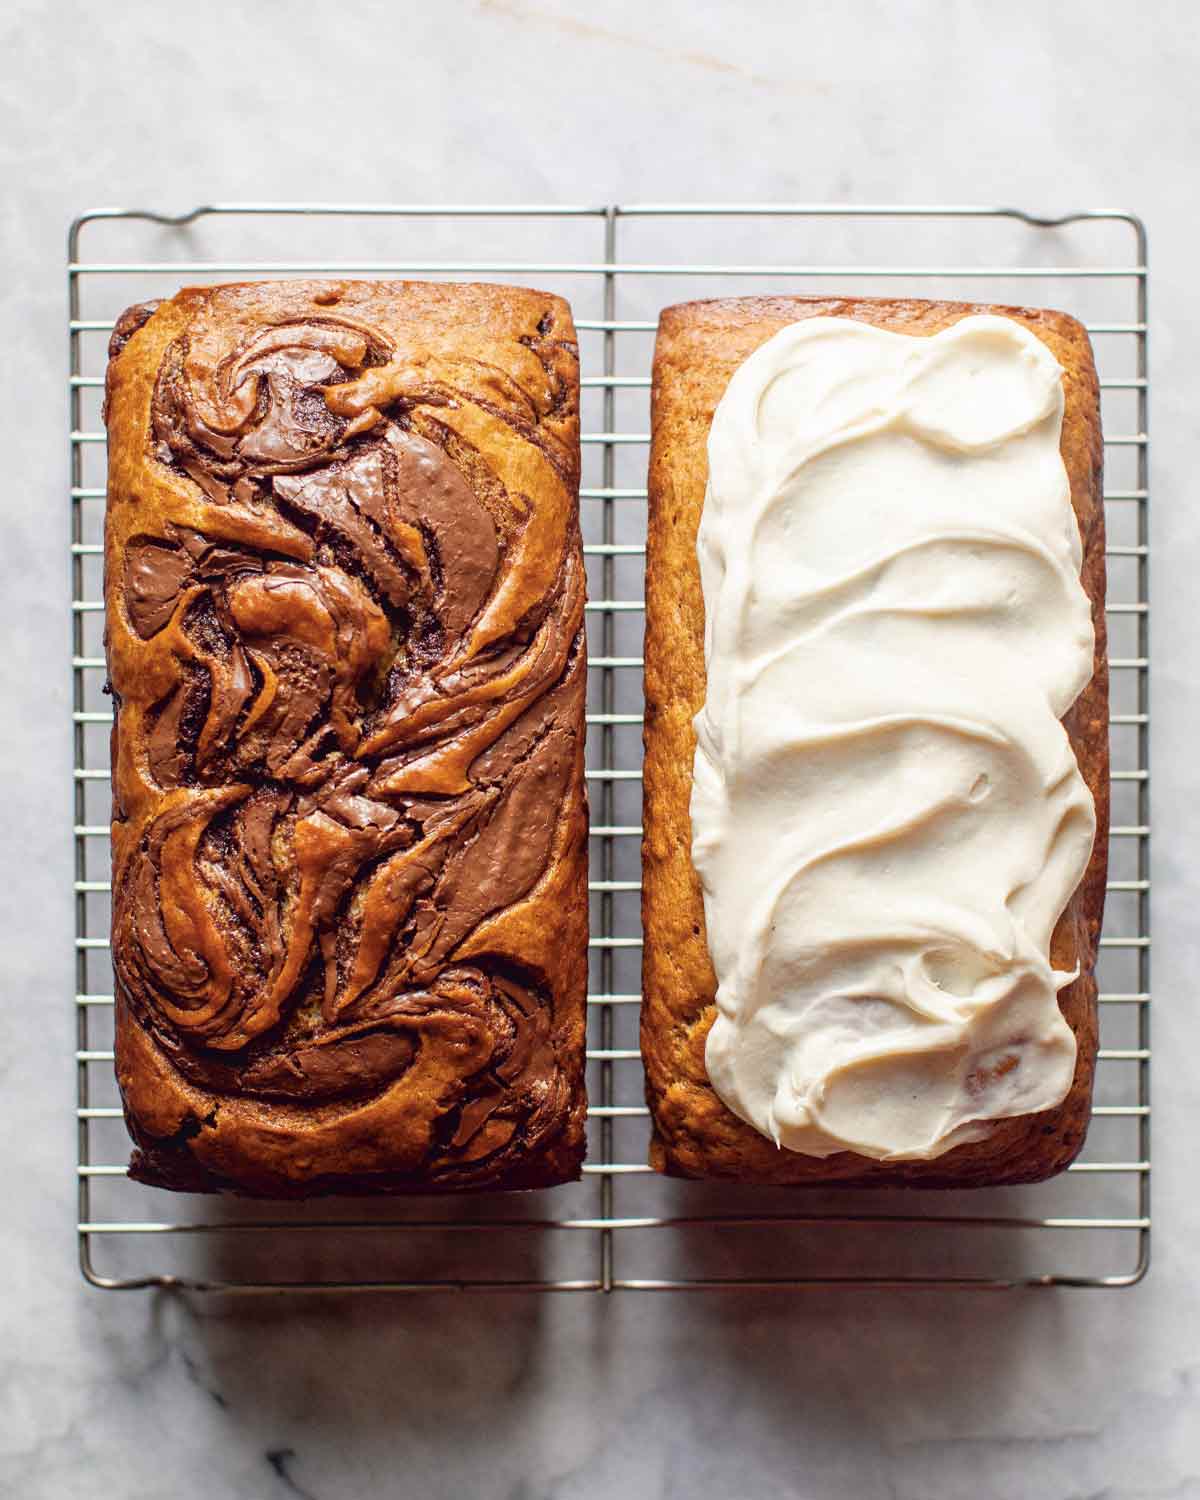 A loaf of banana bread with swirls of nutella next to a loaf of banana bread with cream cheese frosting on a wire rack.